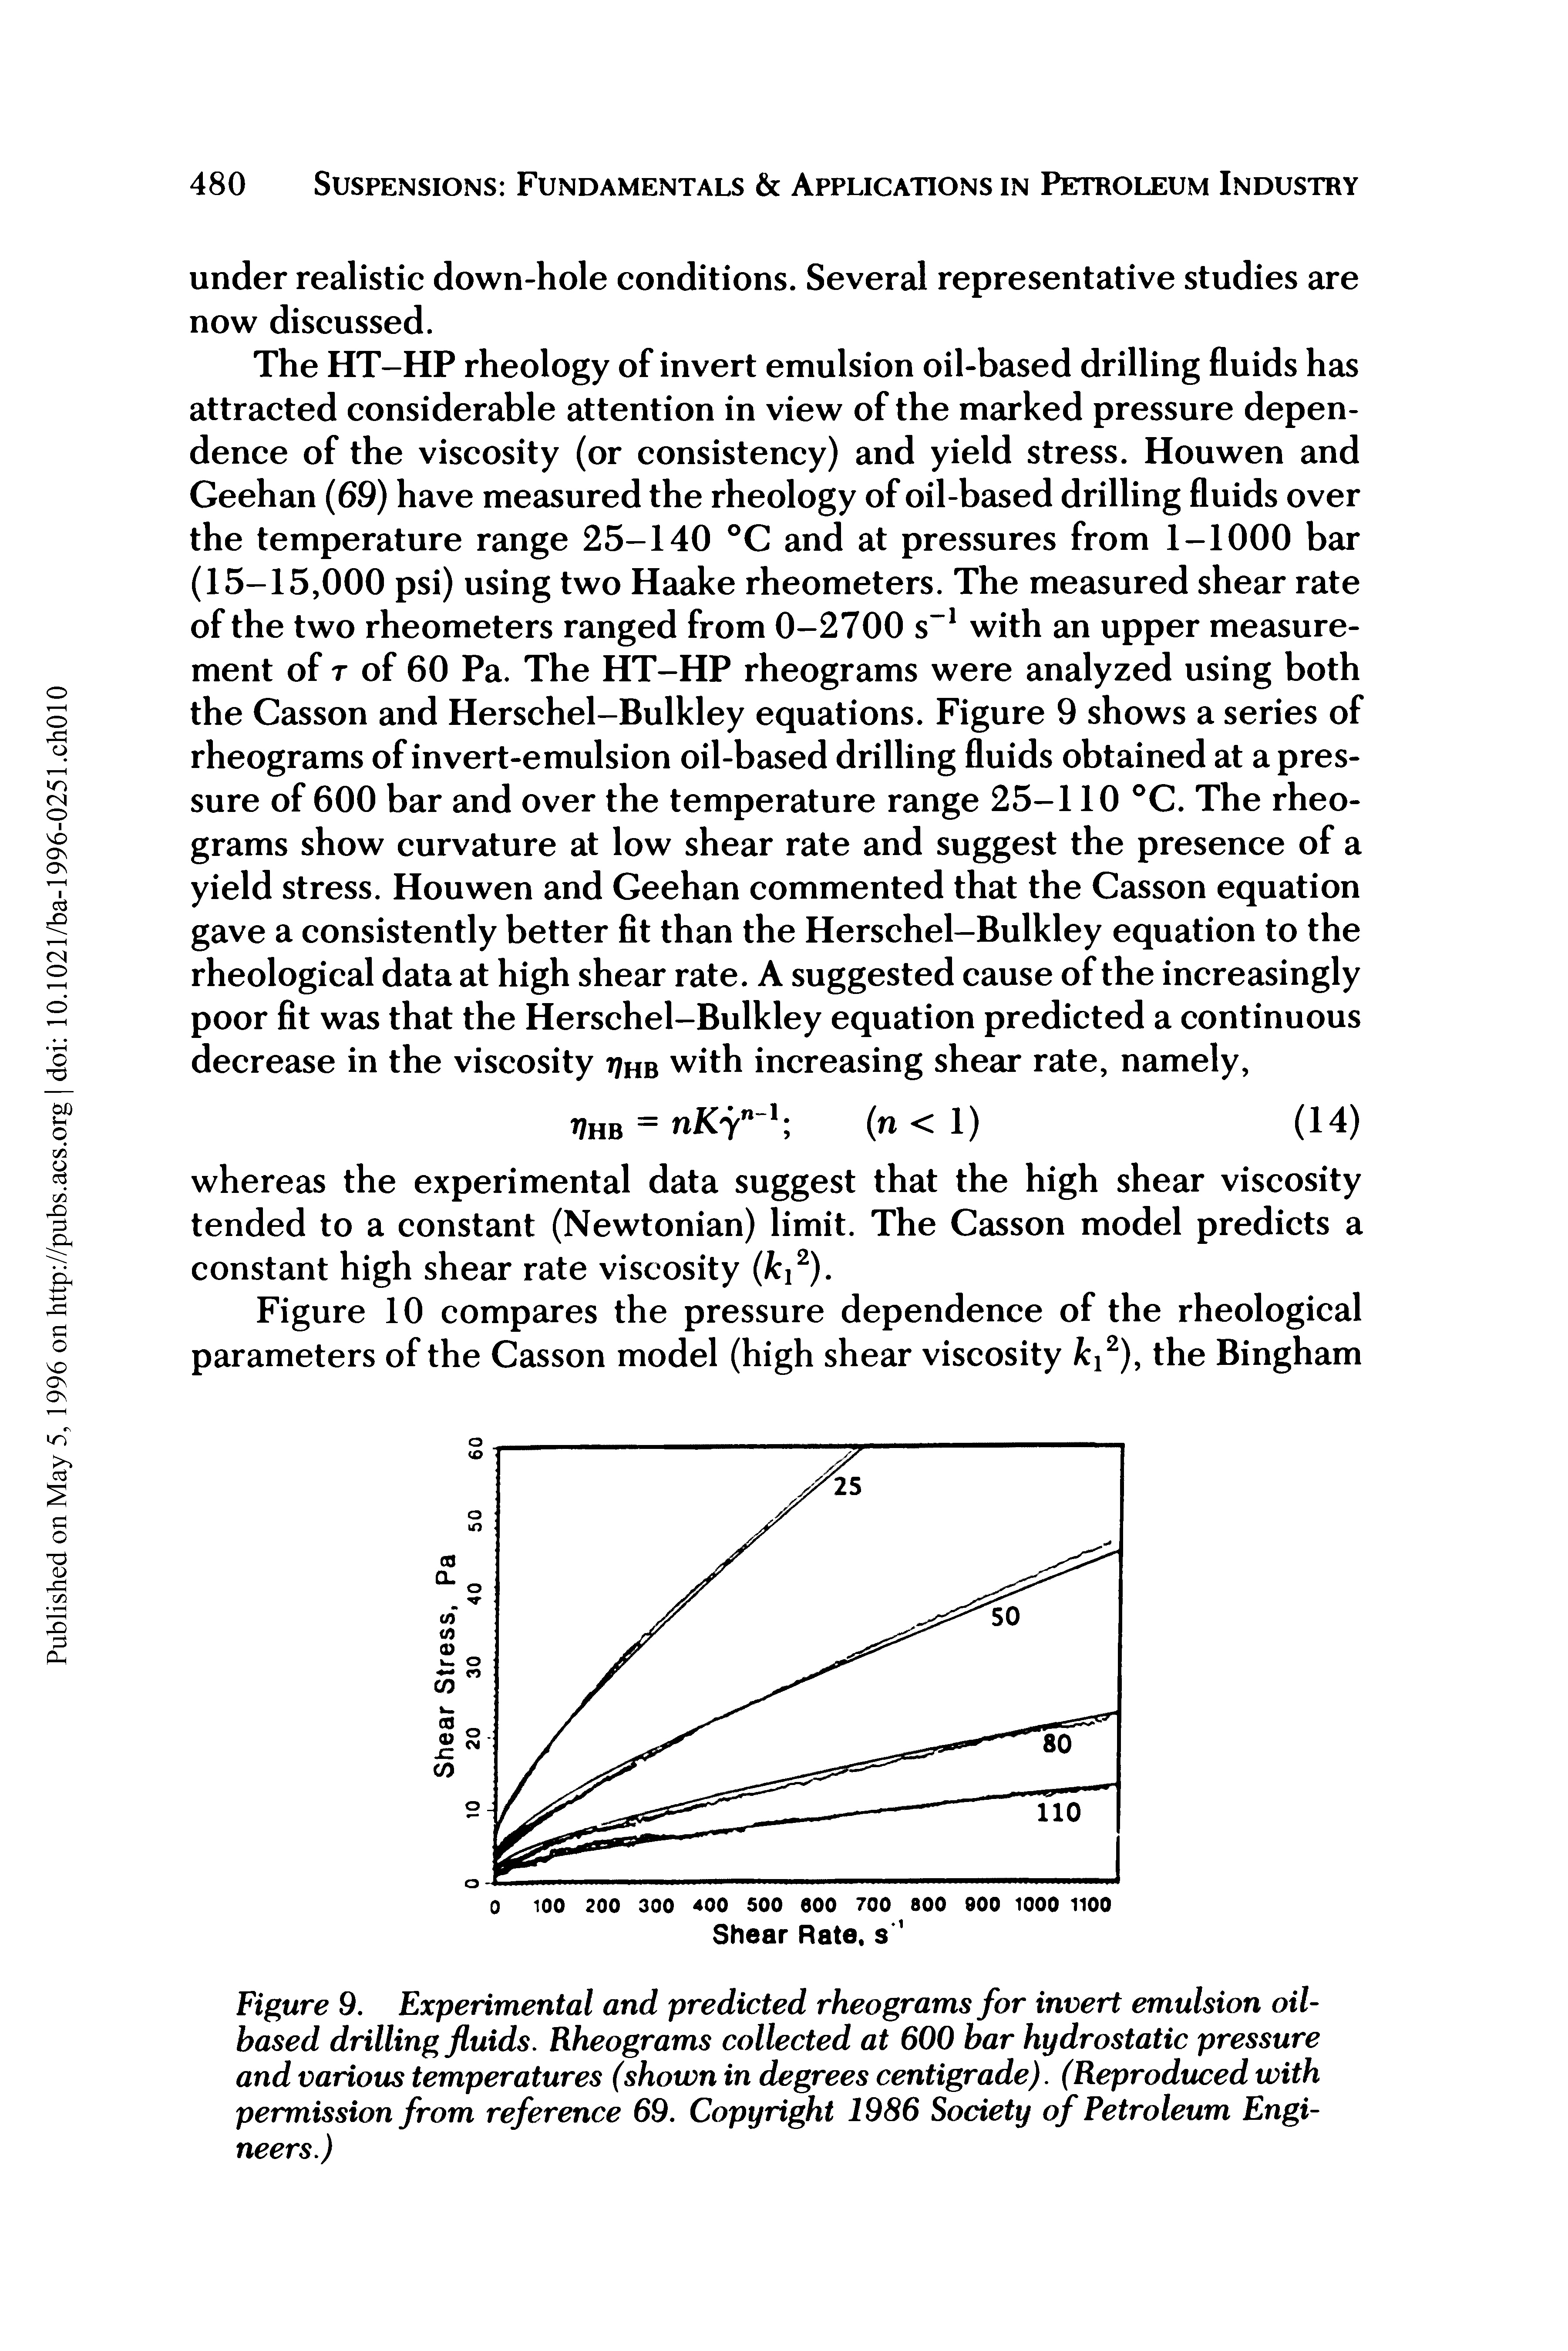 Figure 9. Experimental and predicted rheograms for invert emulsion oil-based drilling fluids. Rheograms collected at 600 bar hydrostatic pressure and various temperatures (shown in degrees centigrade). (Reproduced with permission from reference 69. Copyright 1986 Society of Petroleum Engineers.)...